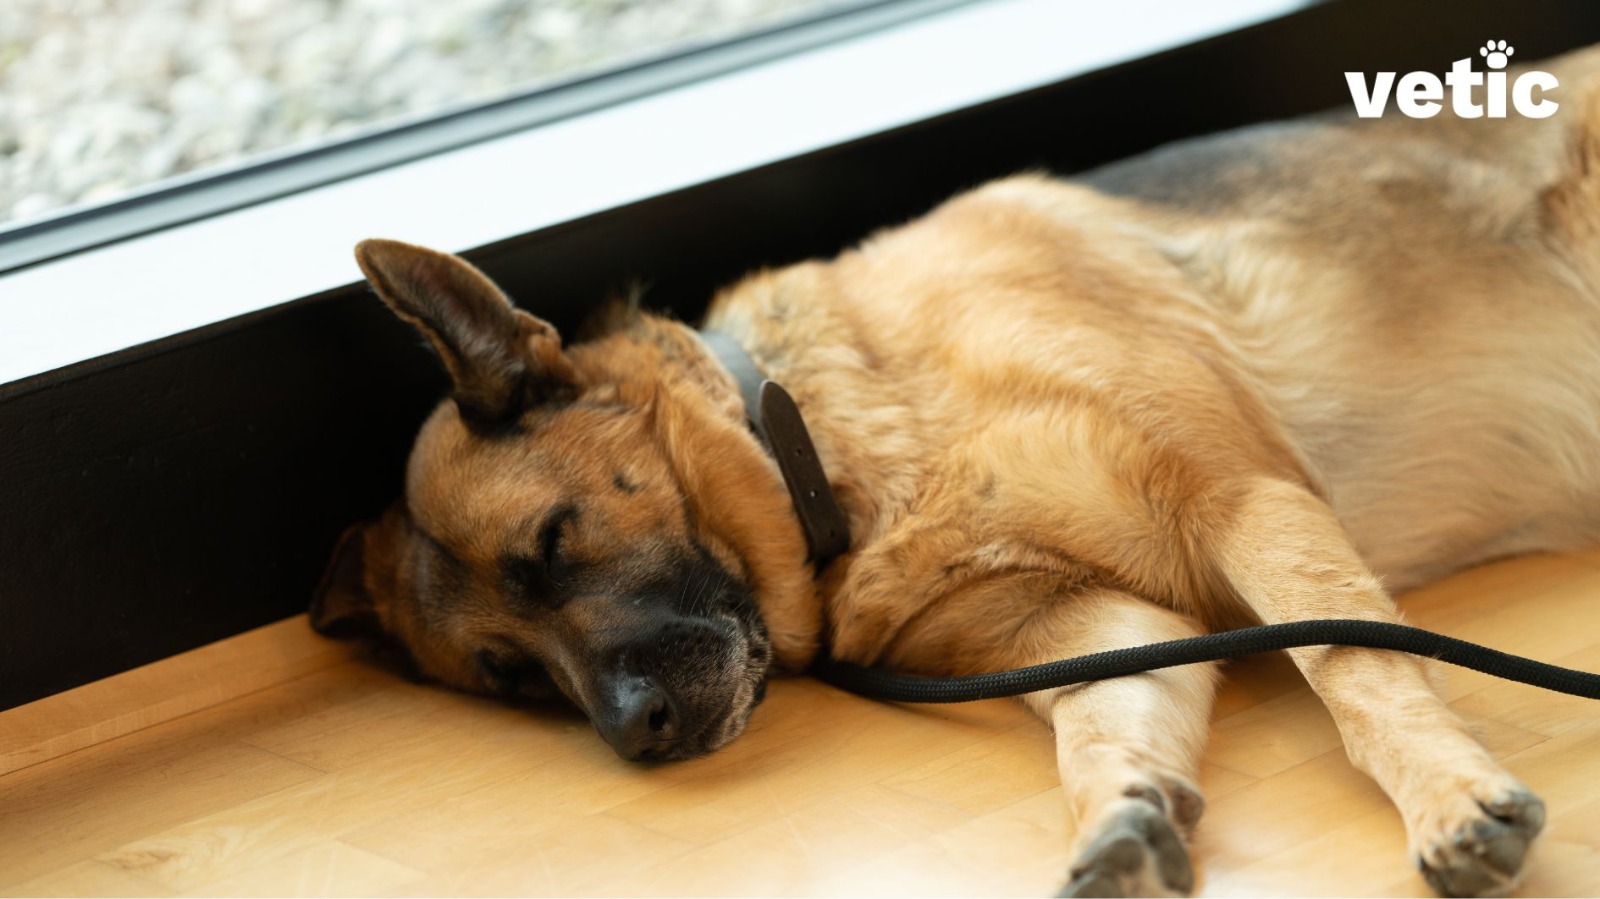 German Shepherd pup on a leash sleeping against a window. When you take your pet to work ensure that they are on a harness or leash for everyone's safety.